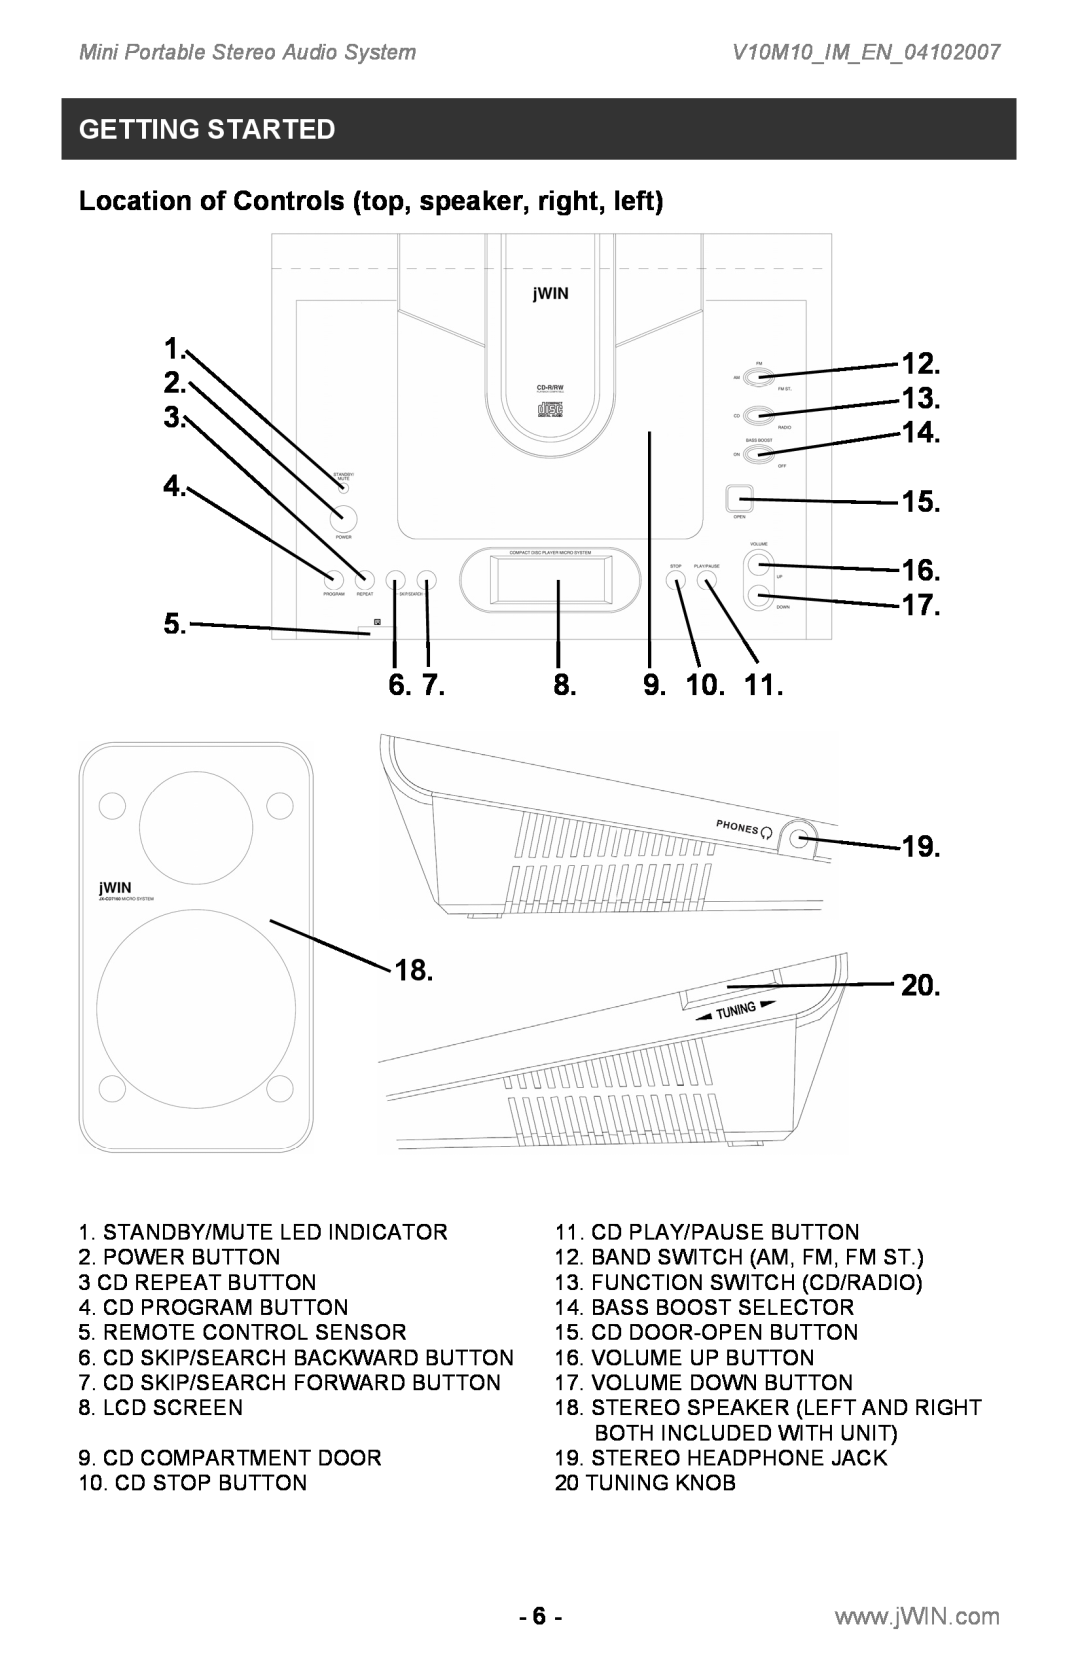 Jwin JX-CD7160 instruction manual Location of Controls top, speaker, right, left, 4.15 